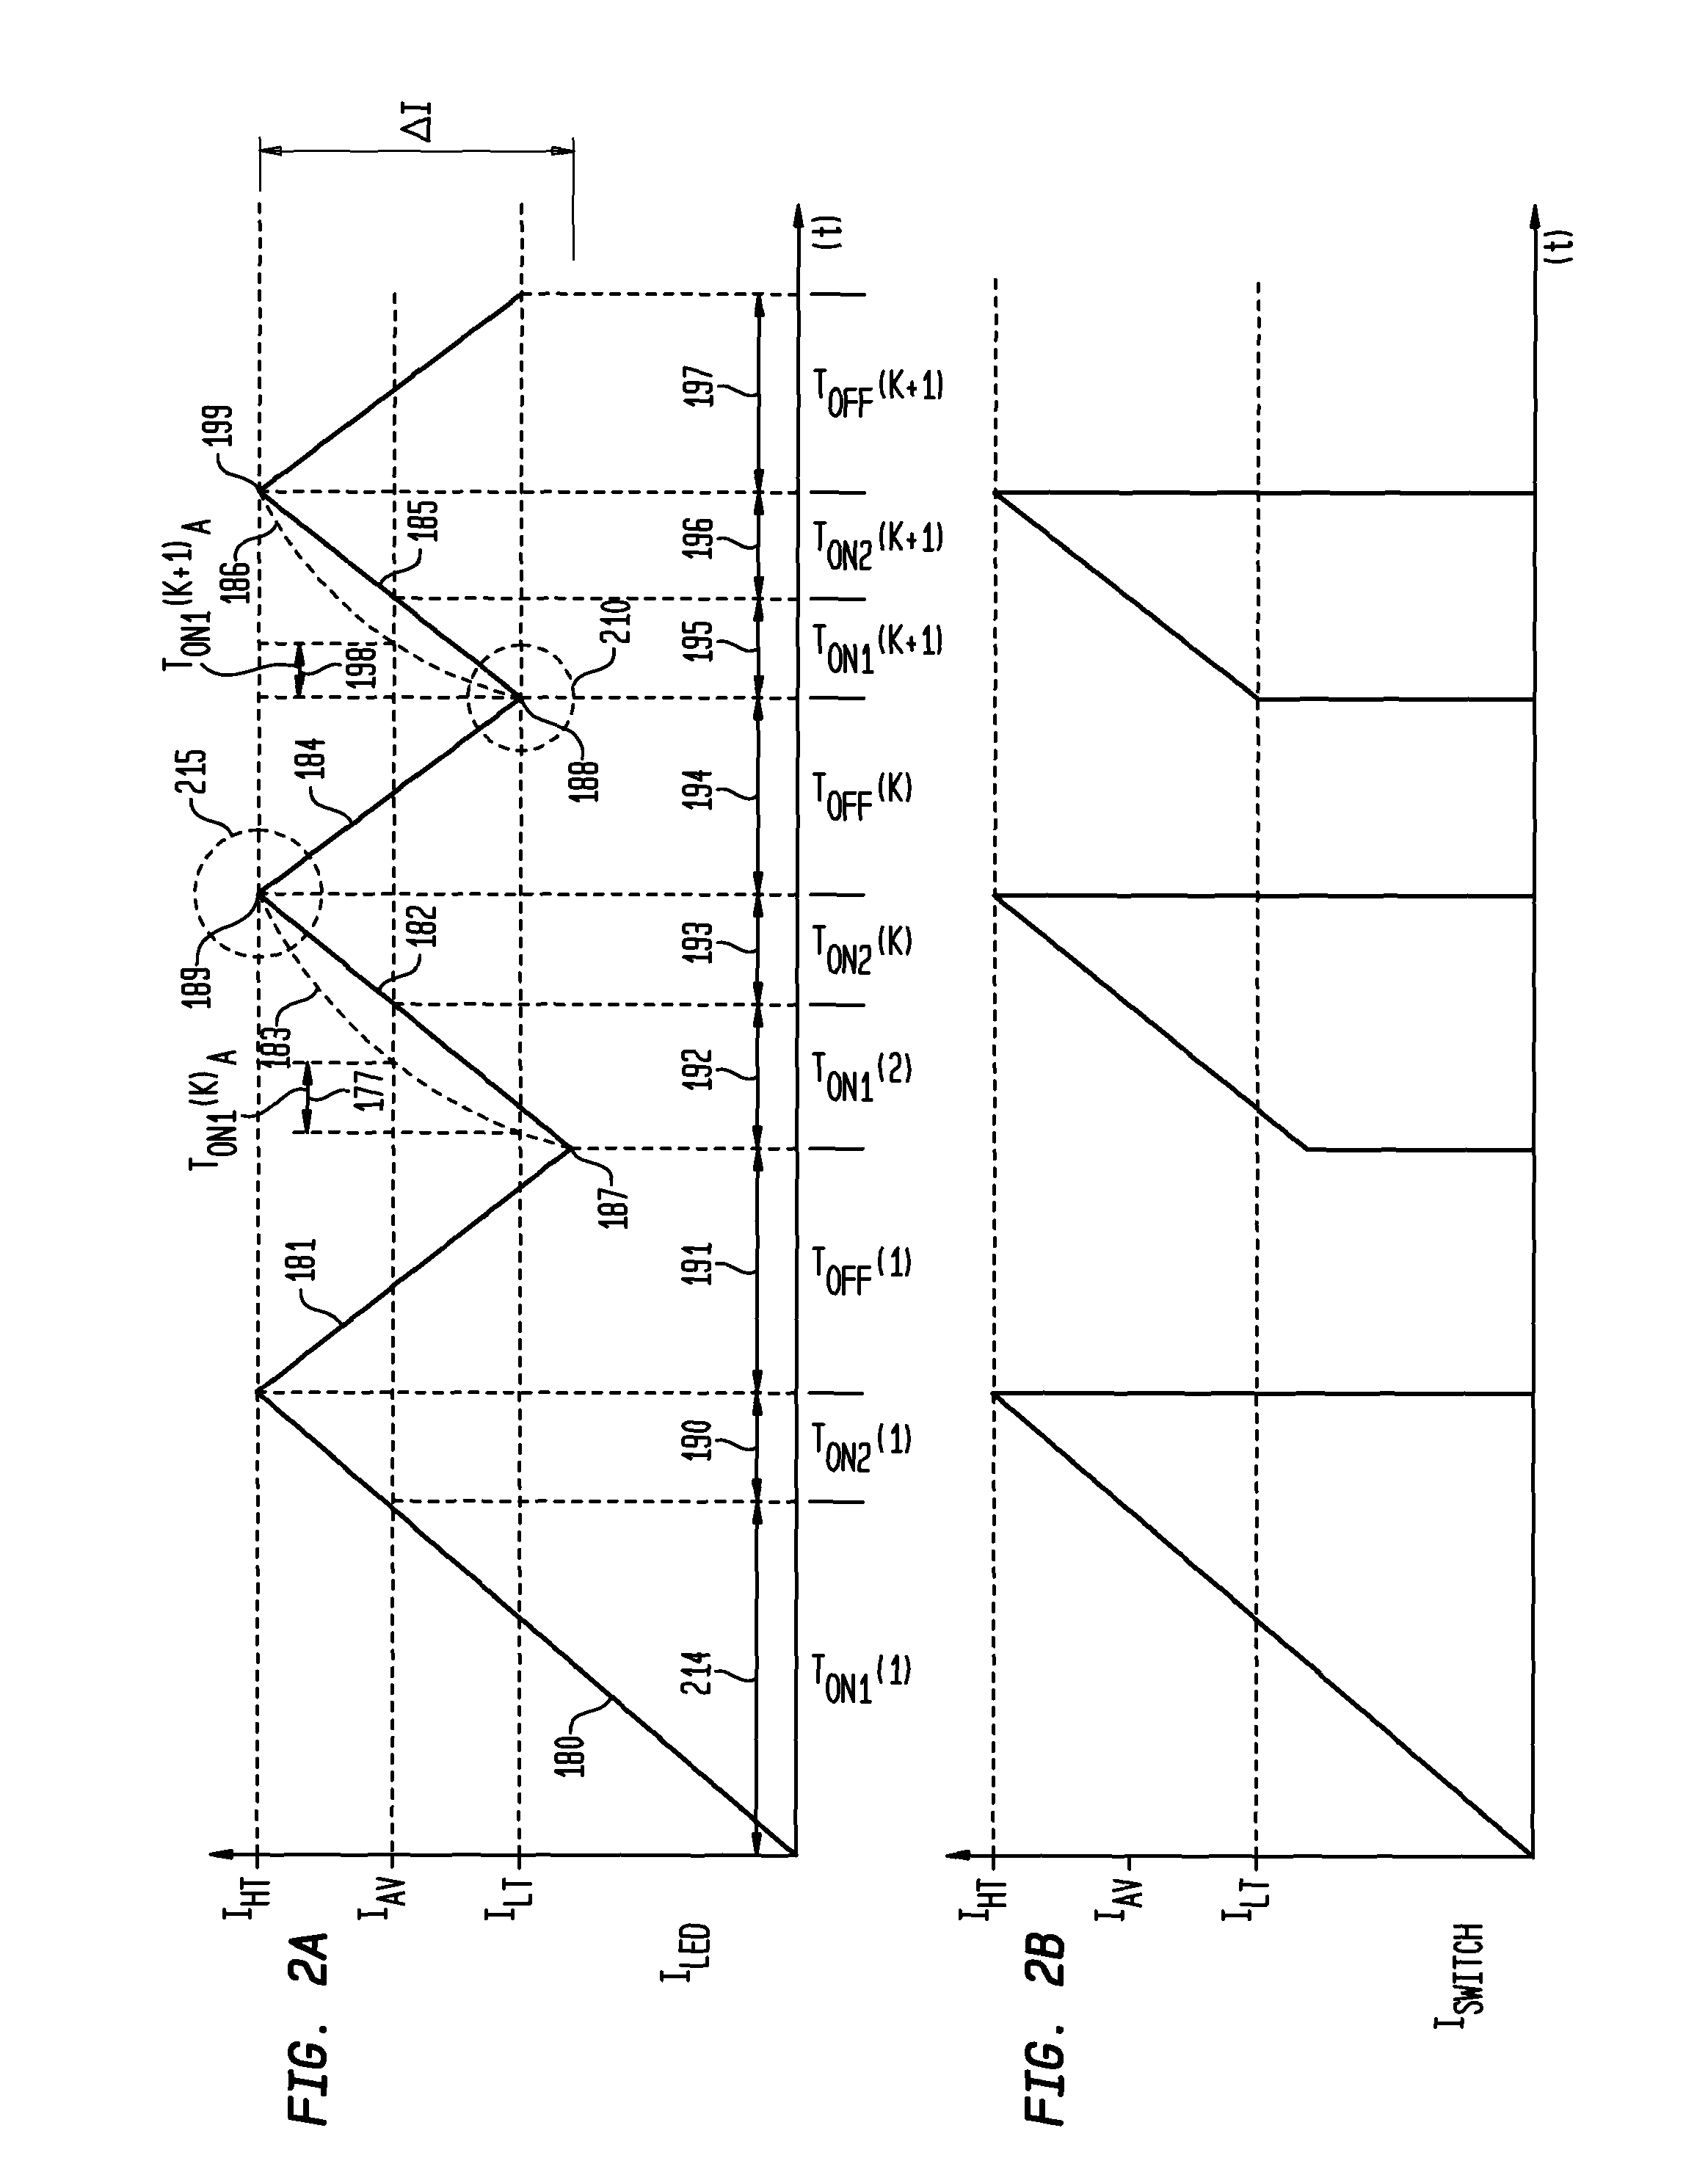 Digital driver apparatus, method and system for solid state lighting